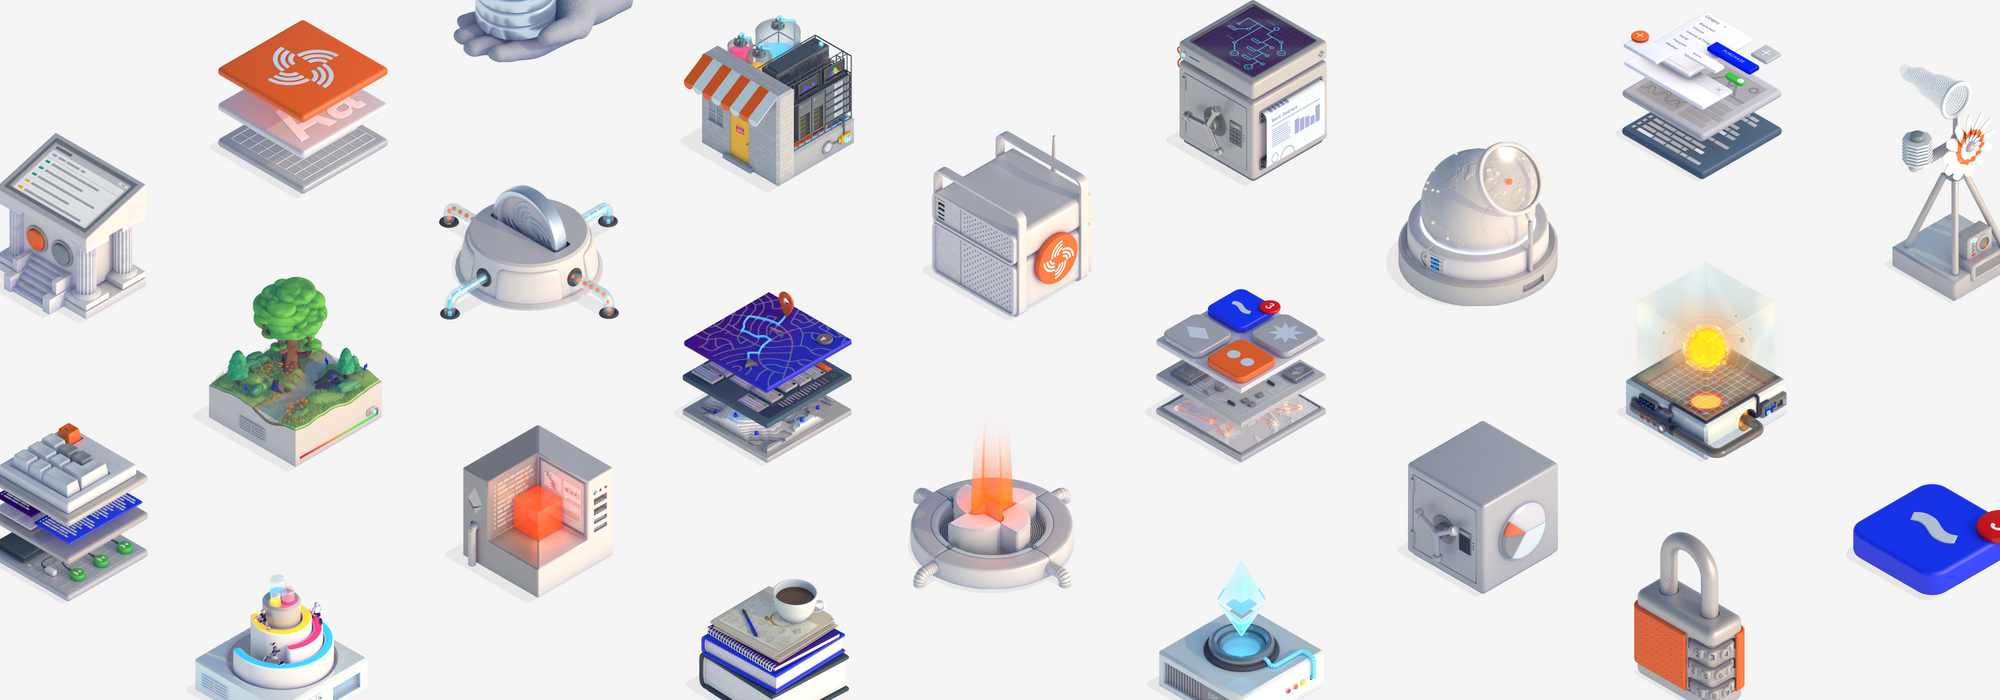 Streamr icons by artist Stuart Wade